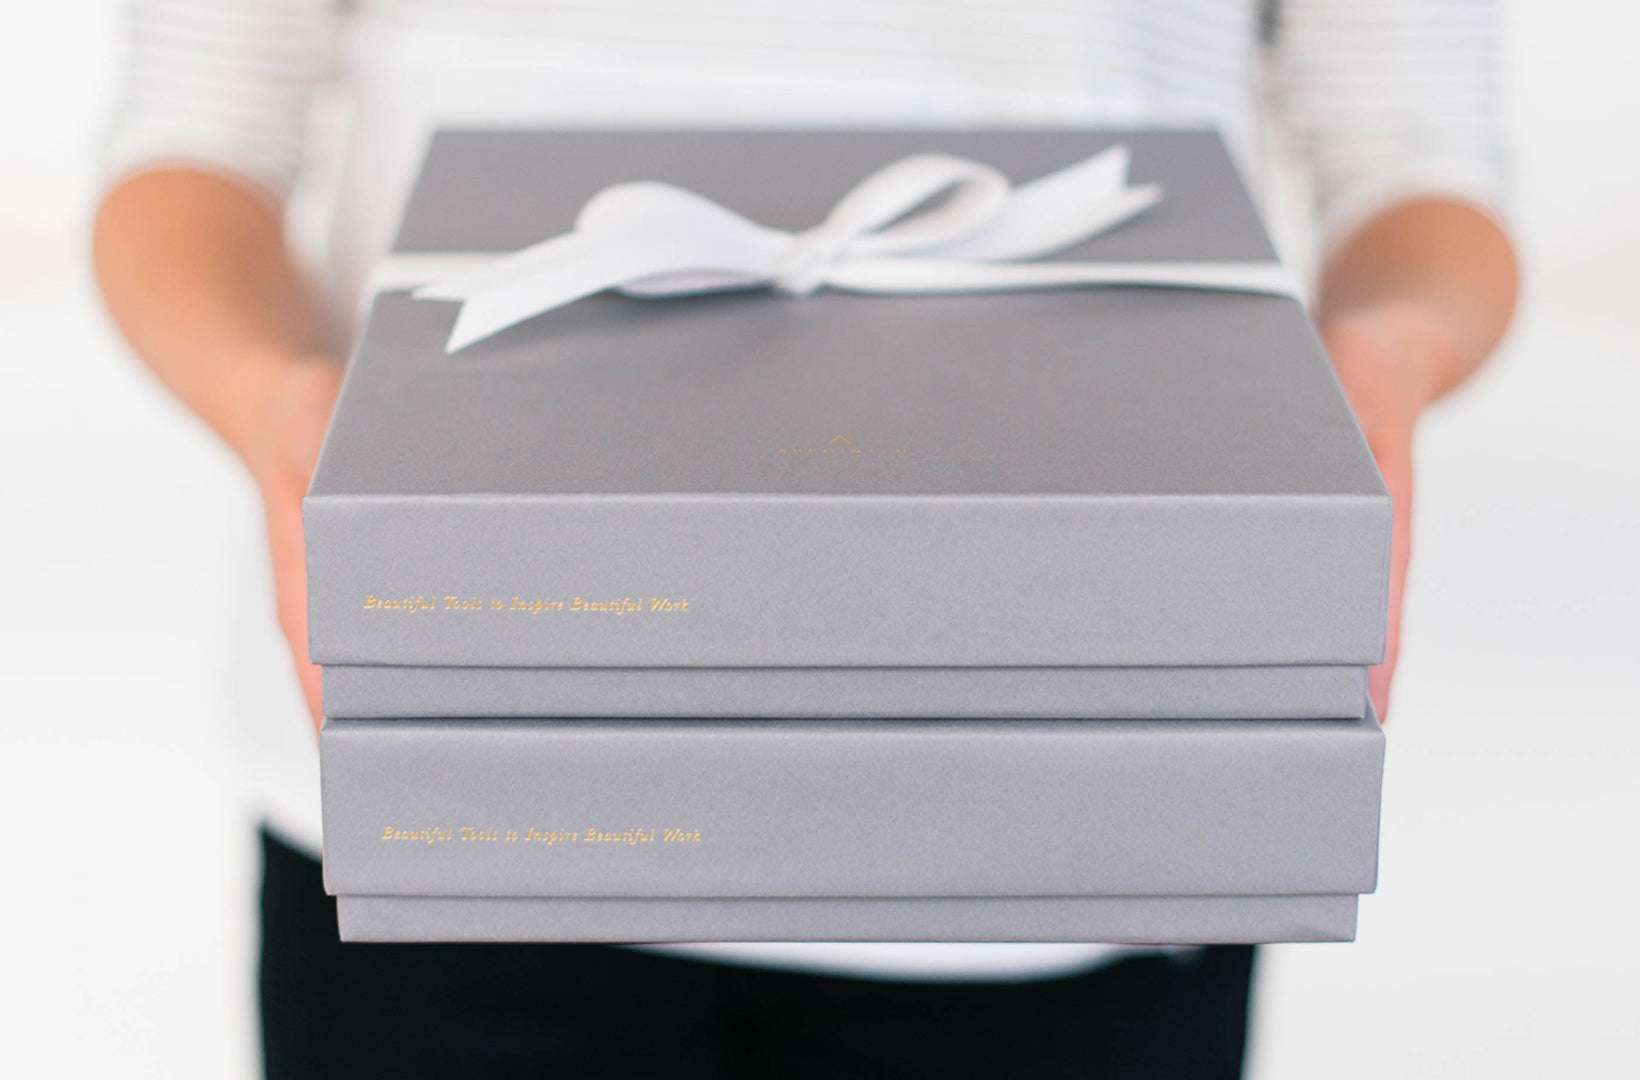 Hands reach out to hand you a dove gray gift box wrapped in white satin ribbon